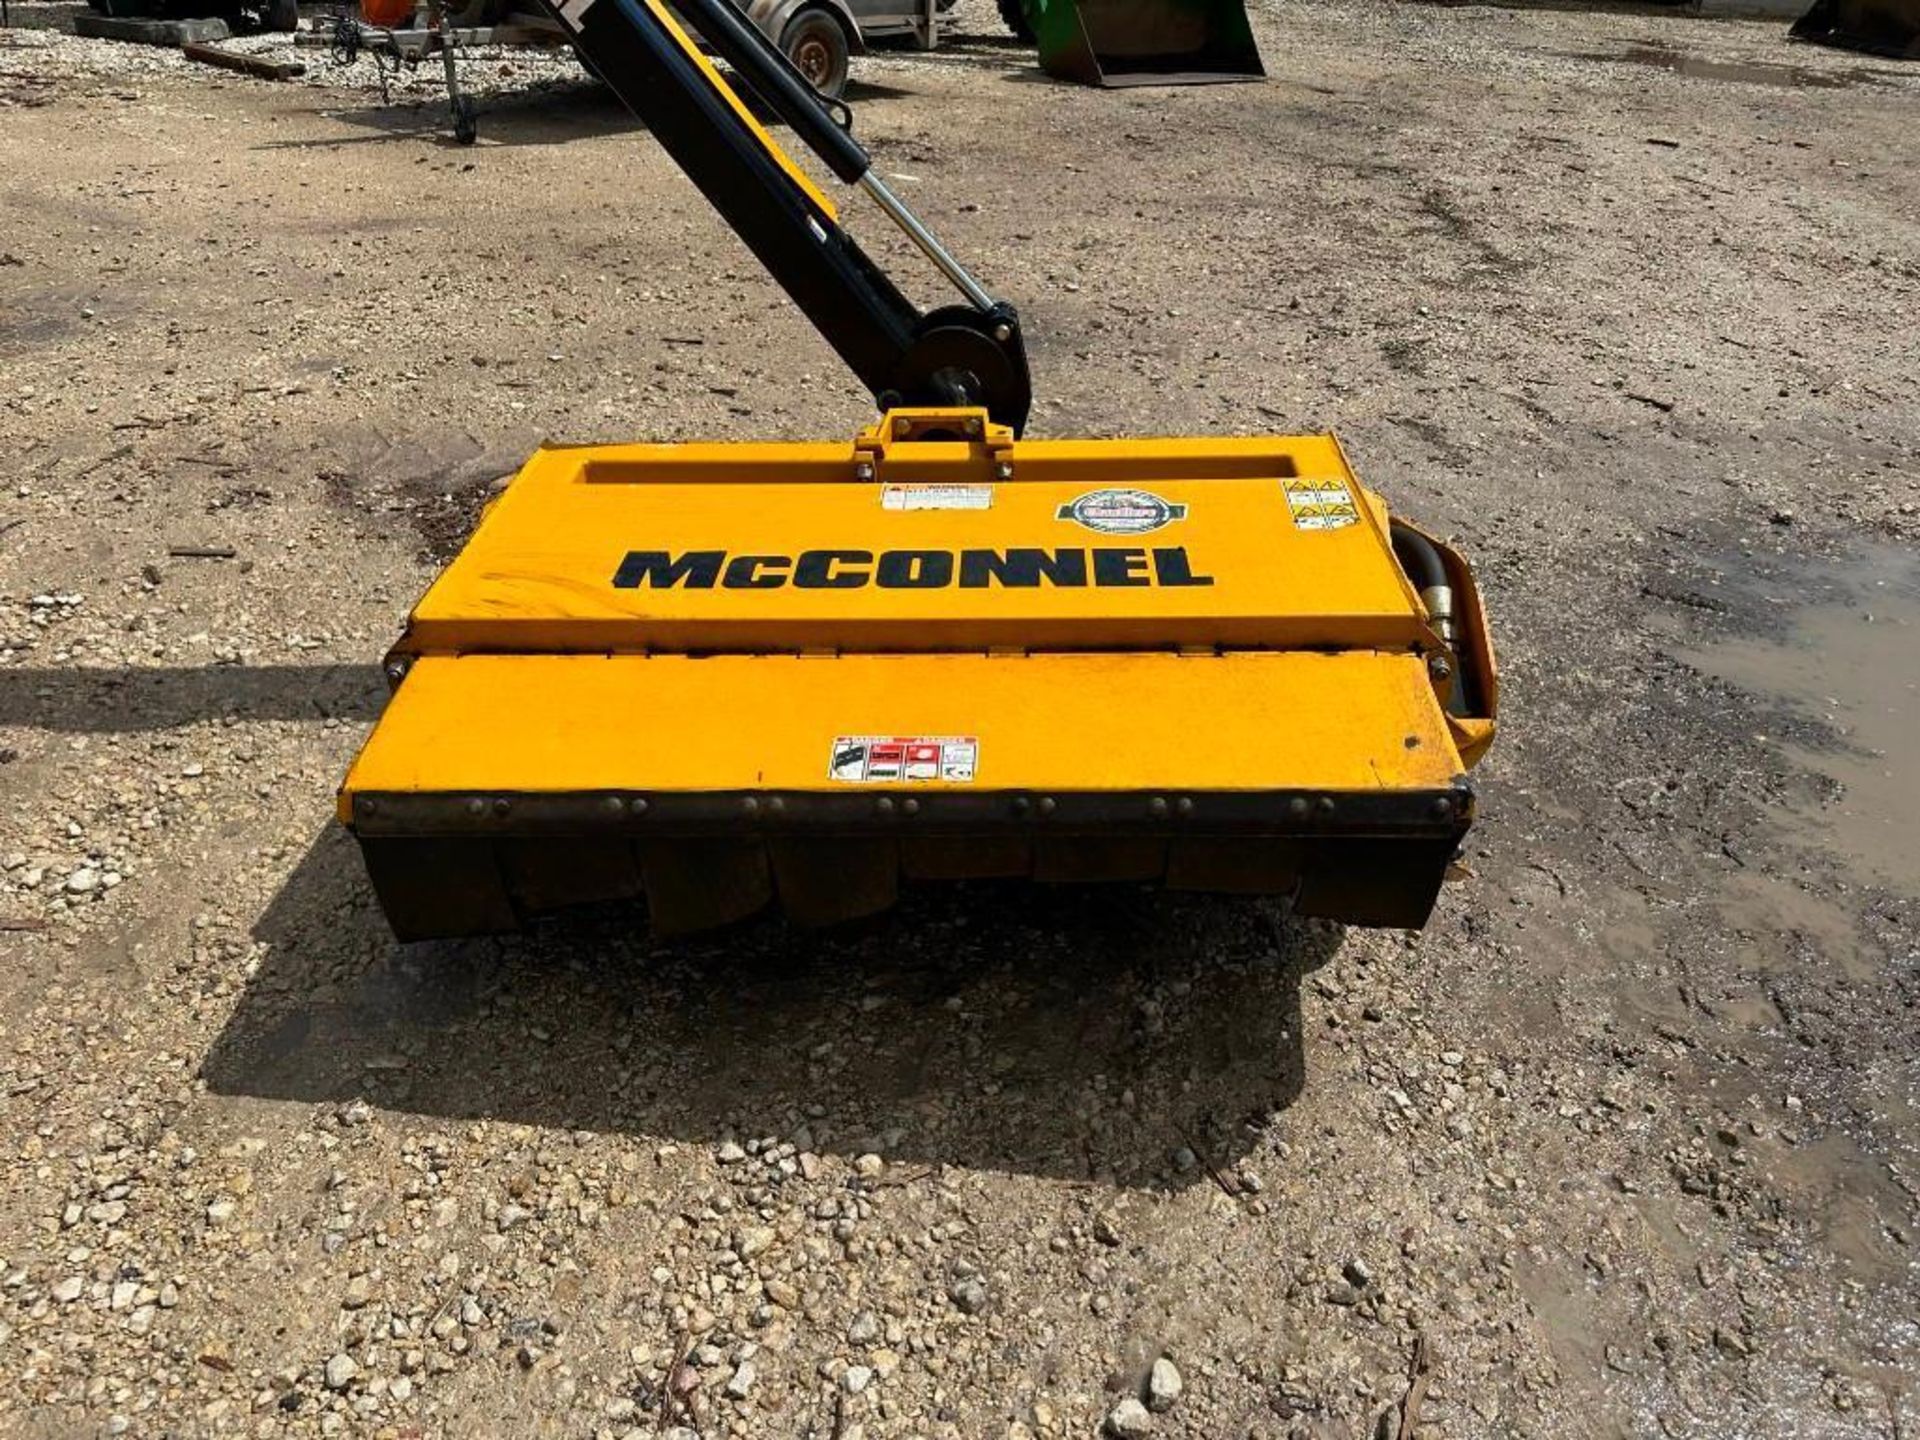 2019 McConnel PA5455 hedge cutter with 1.3m flail head, 3 point linkage attachments, hydraulic rolle - Image 6 of 8